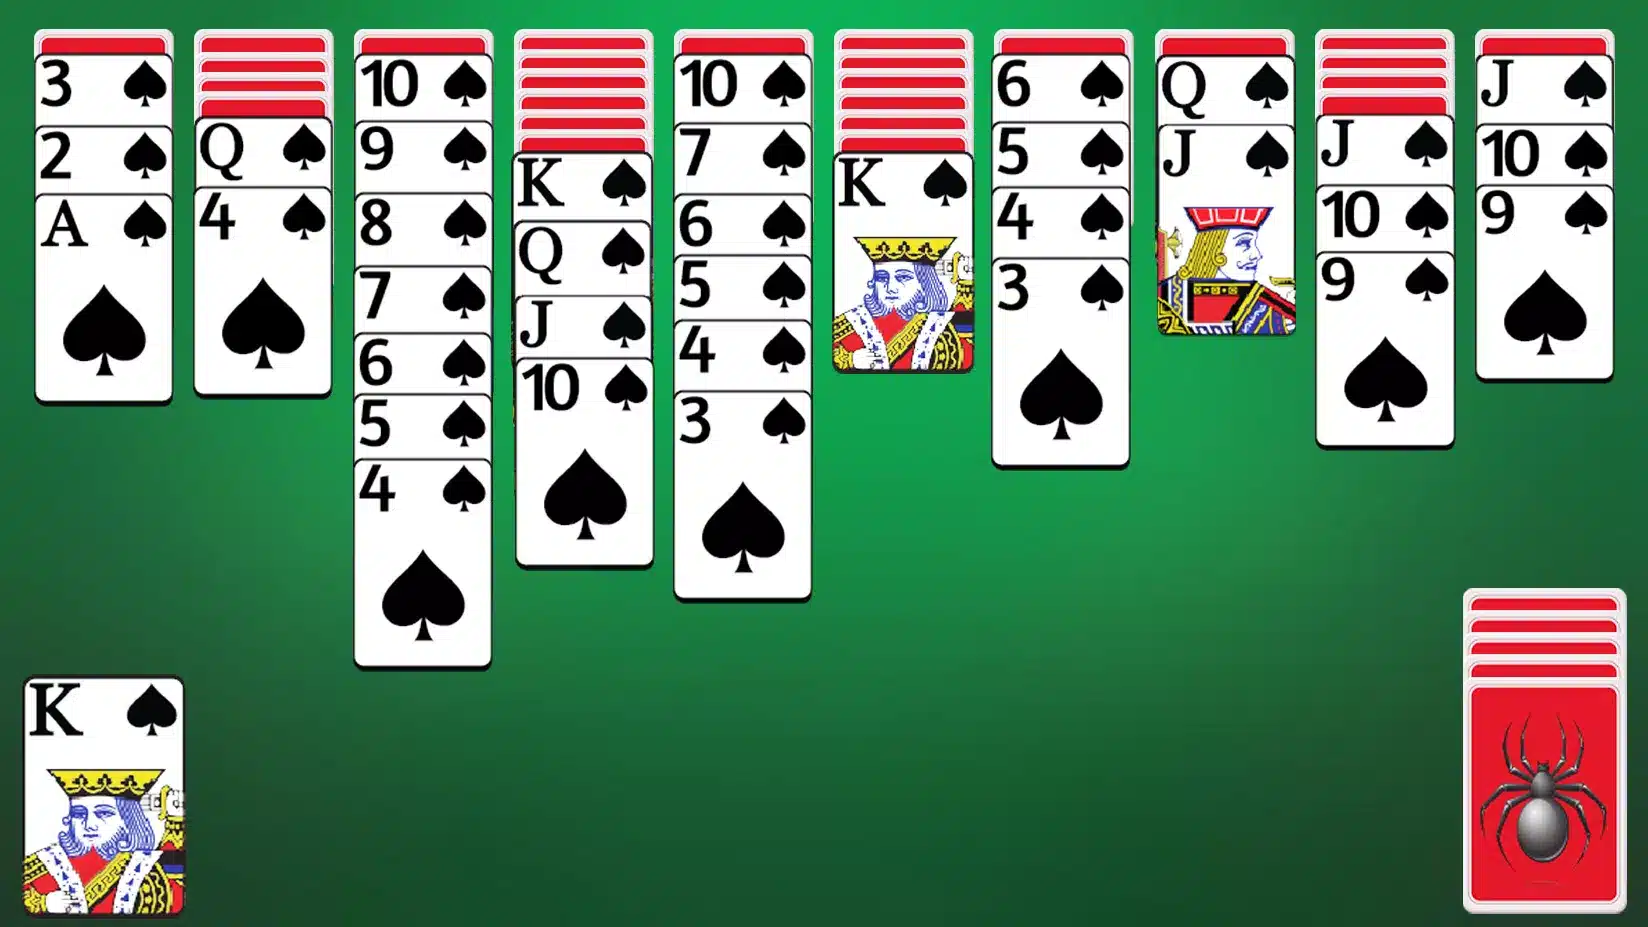 Spider Solitaire Image 4